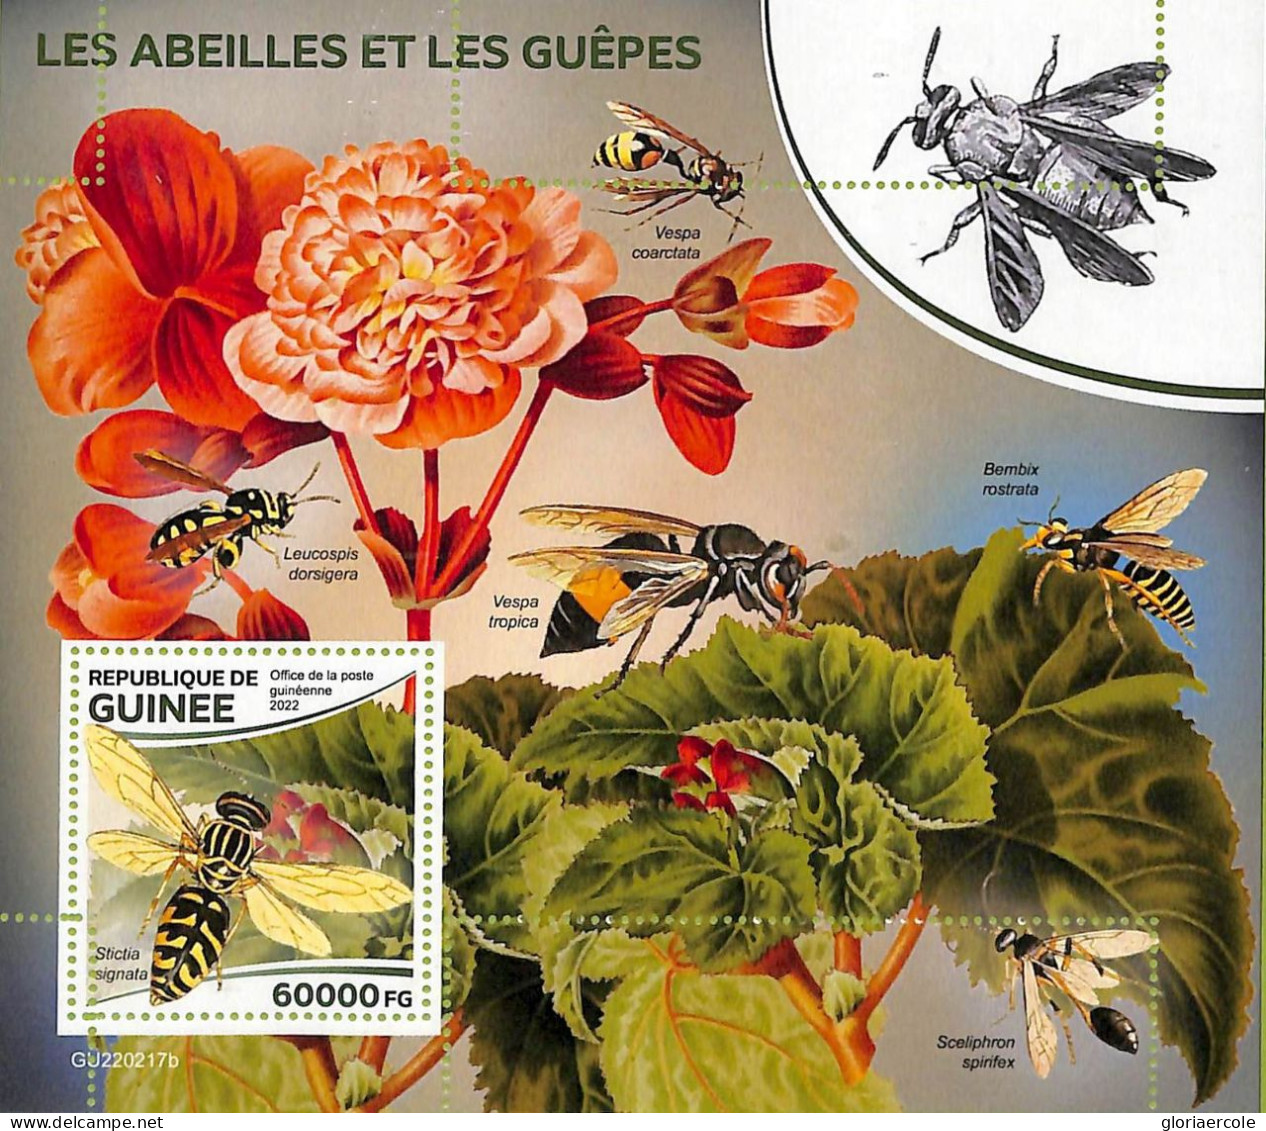 A9474 - REP.GUINEE - ERROR MISPERF Stamp Sheet - 2022 - Insects,BEES AND WASPS - Abeilles